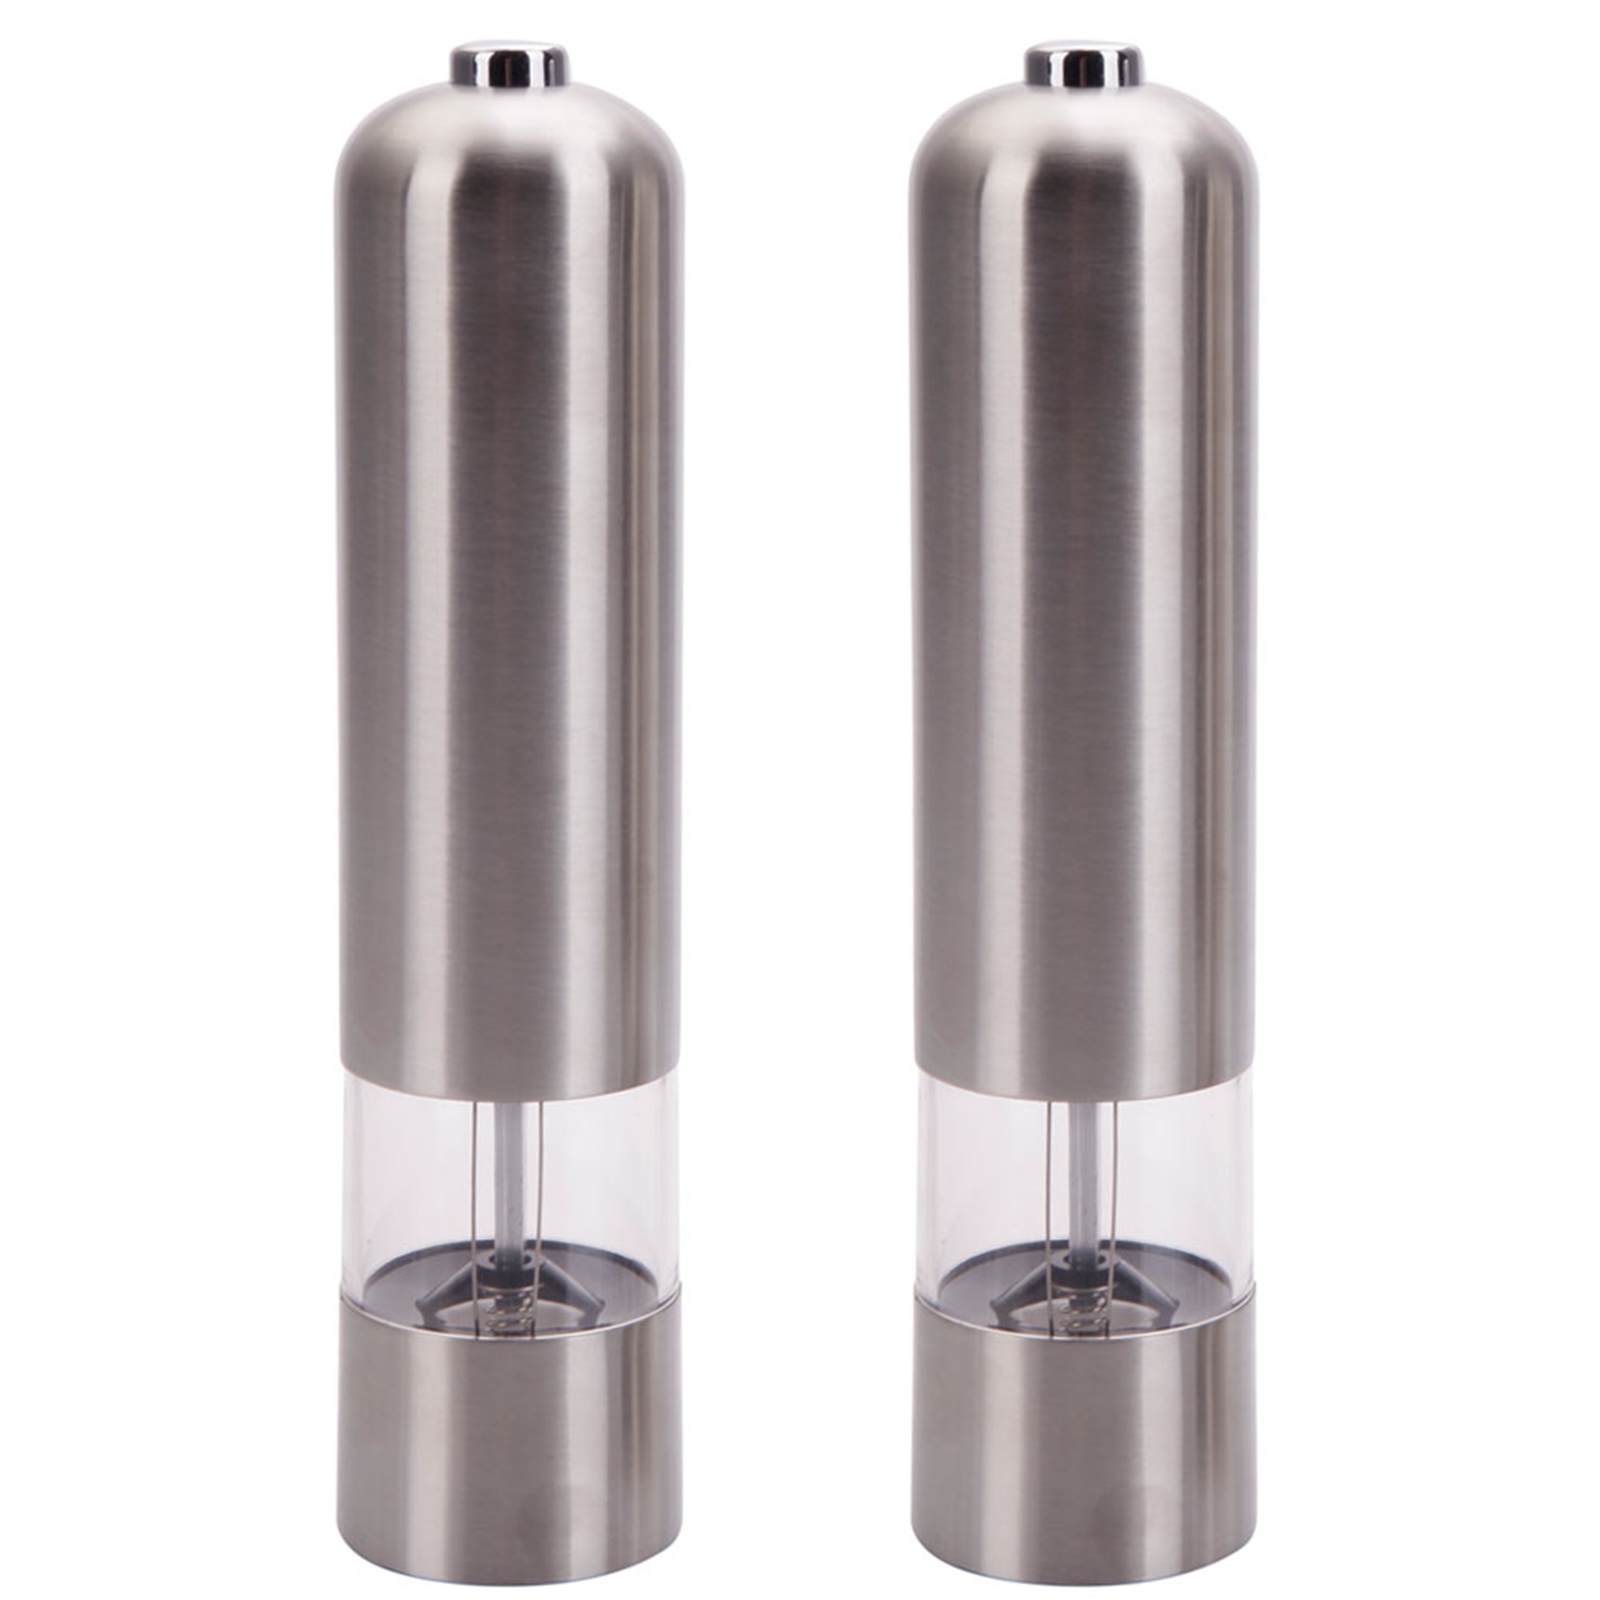 US 2pcs Electric Pepper Grinder Battery Powered Fineness Adjustable Automatic